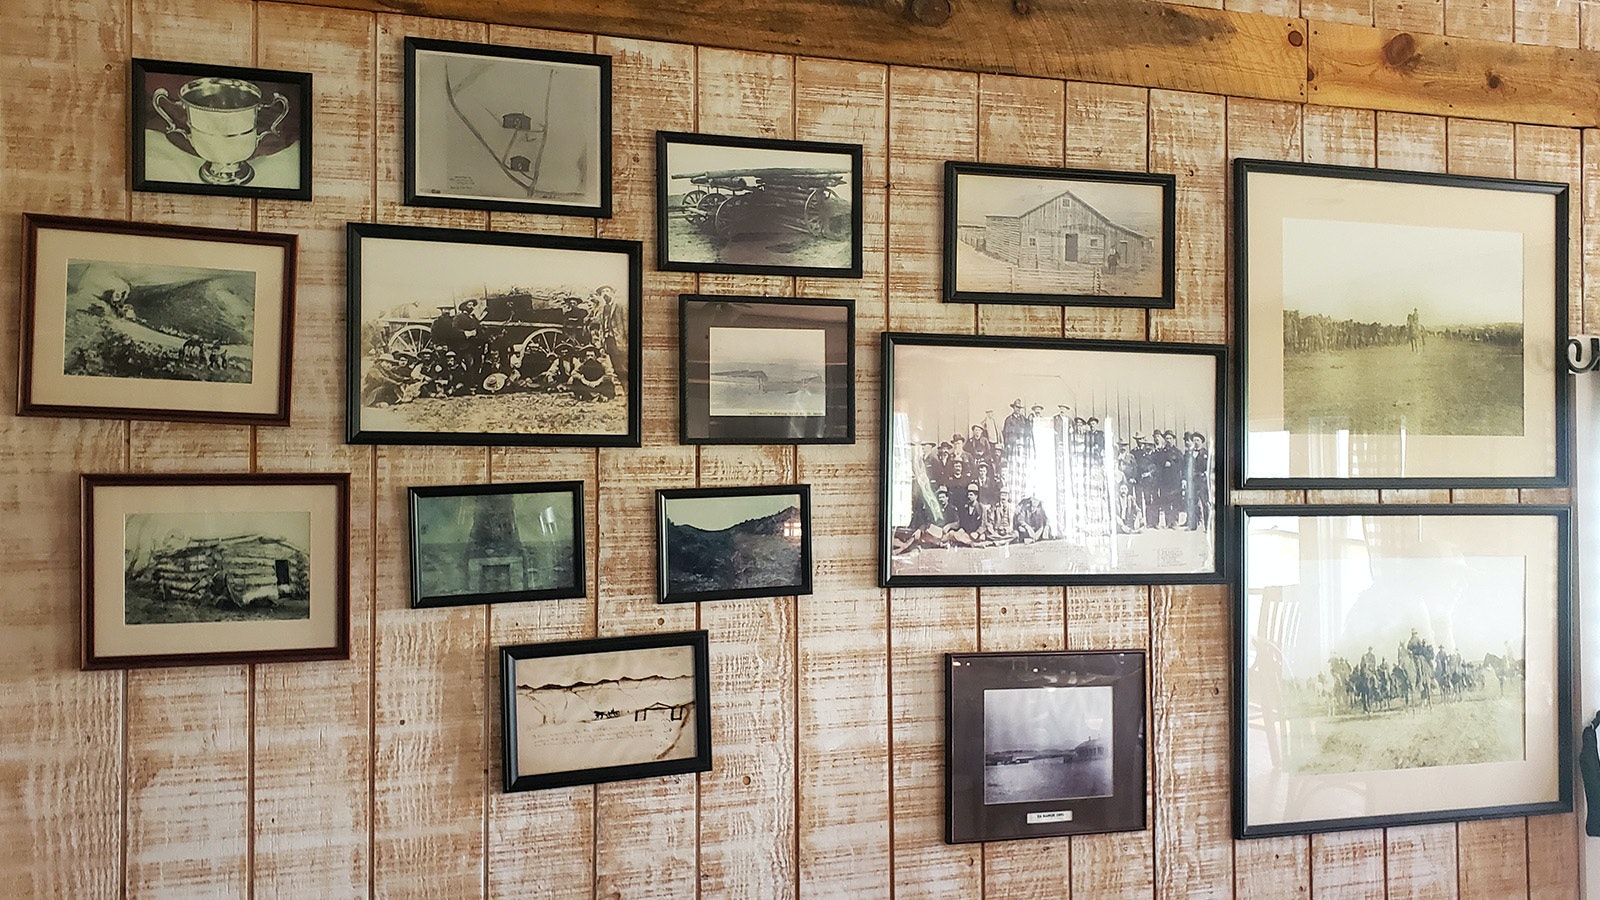 Several photos on the wall of the dining hall shows the ranch during the era of the Johnson County War.